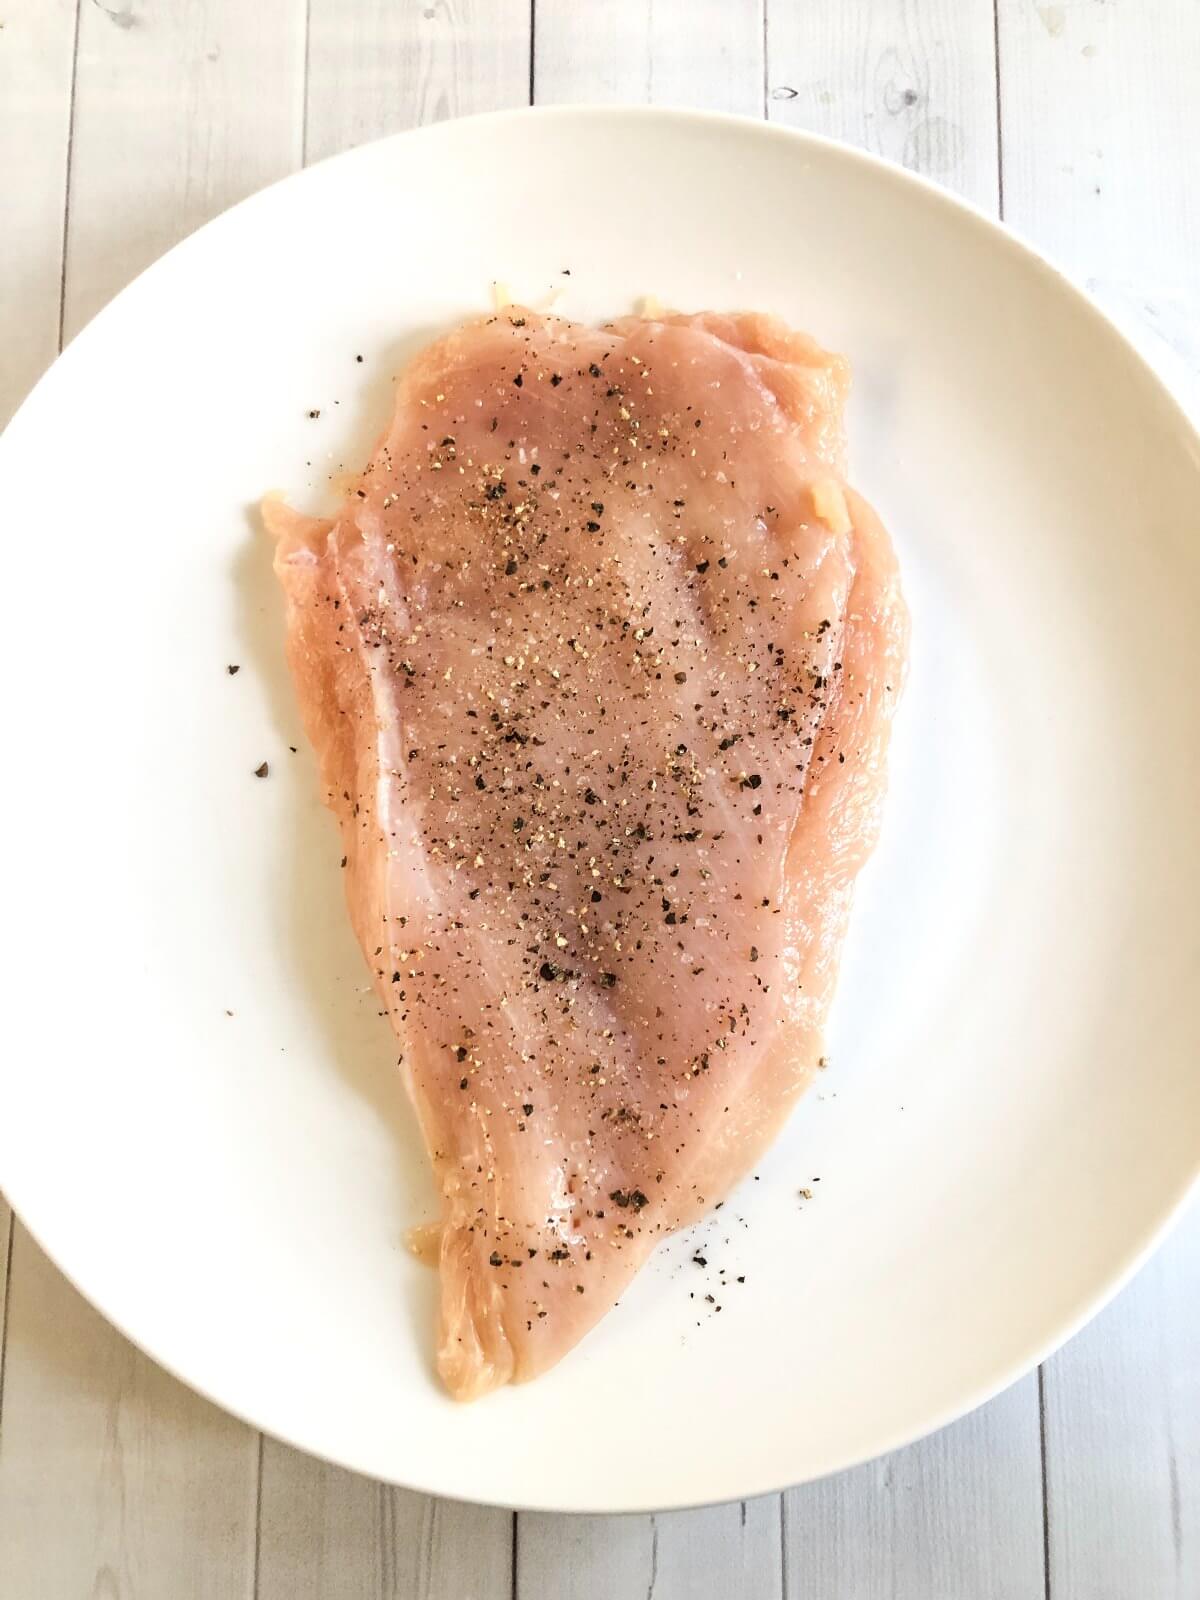 RAW CHICKEN BREAST WITH SALT AND PEPPER